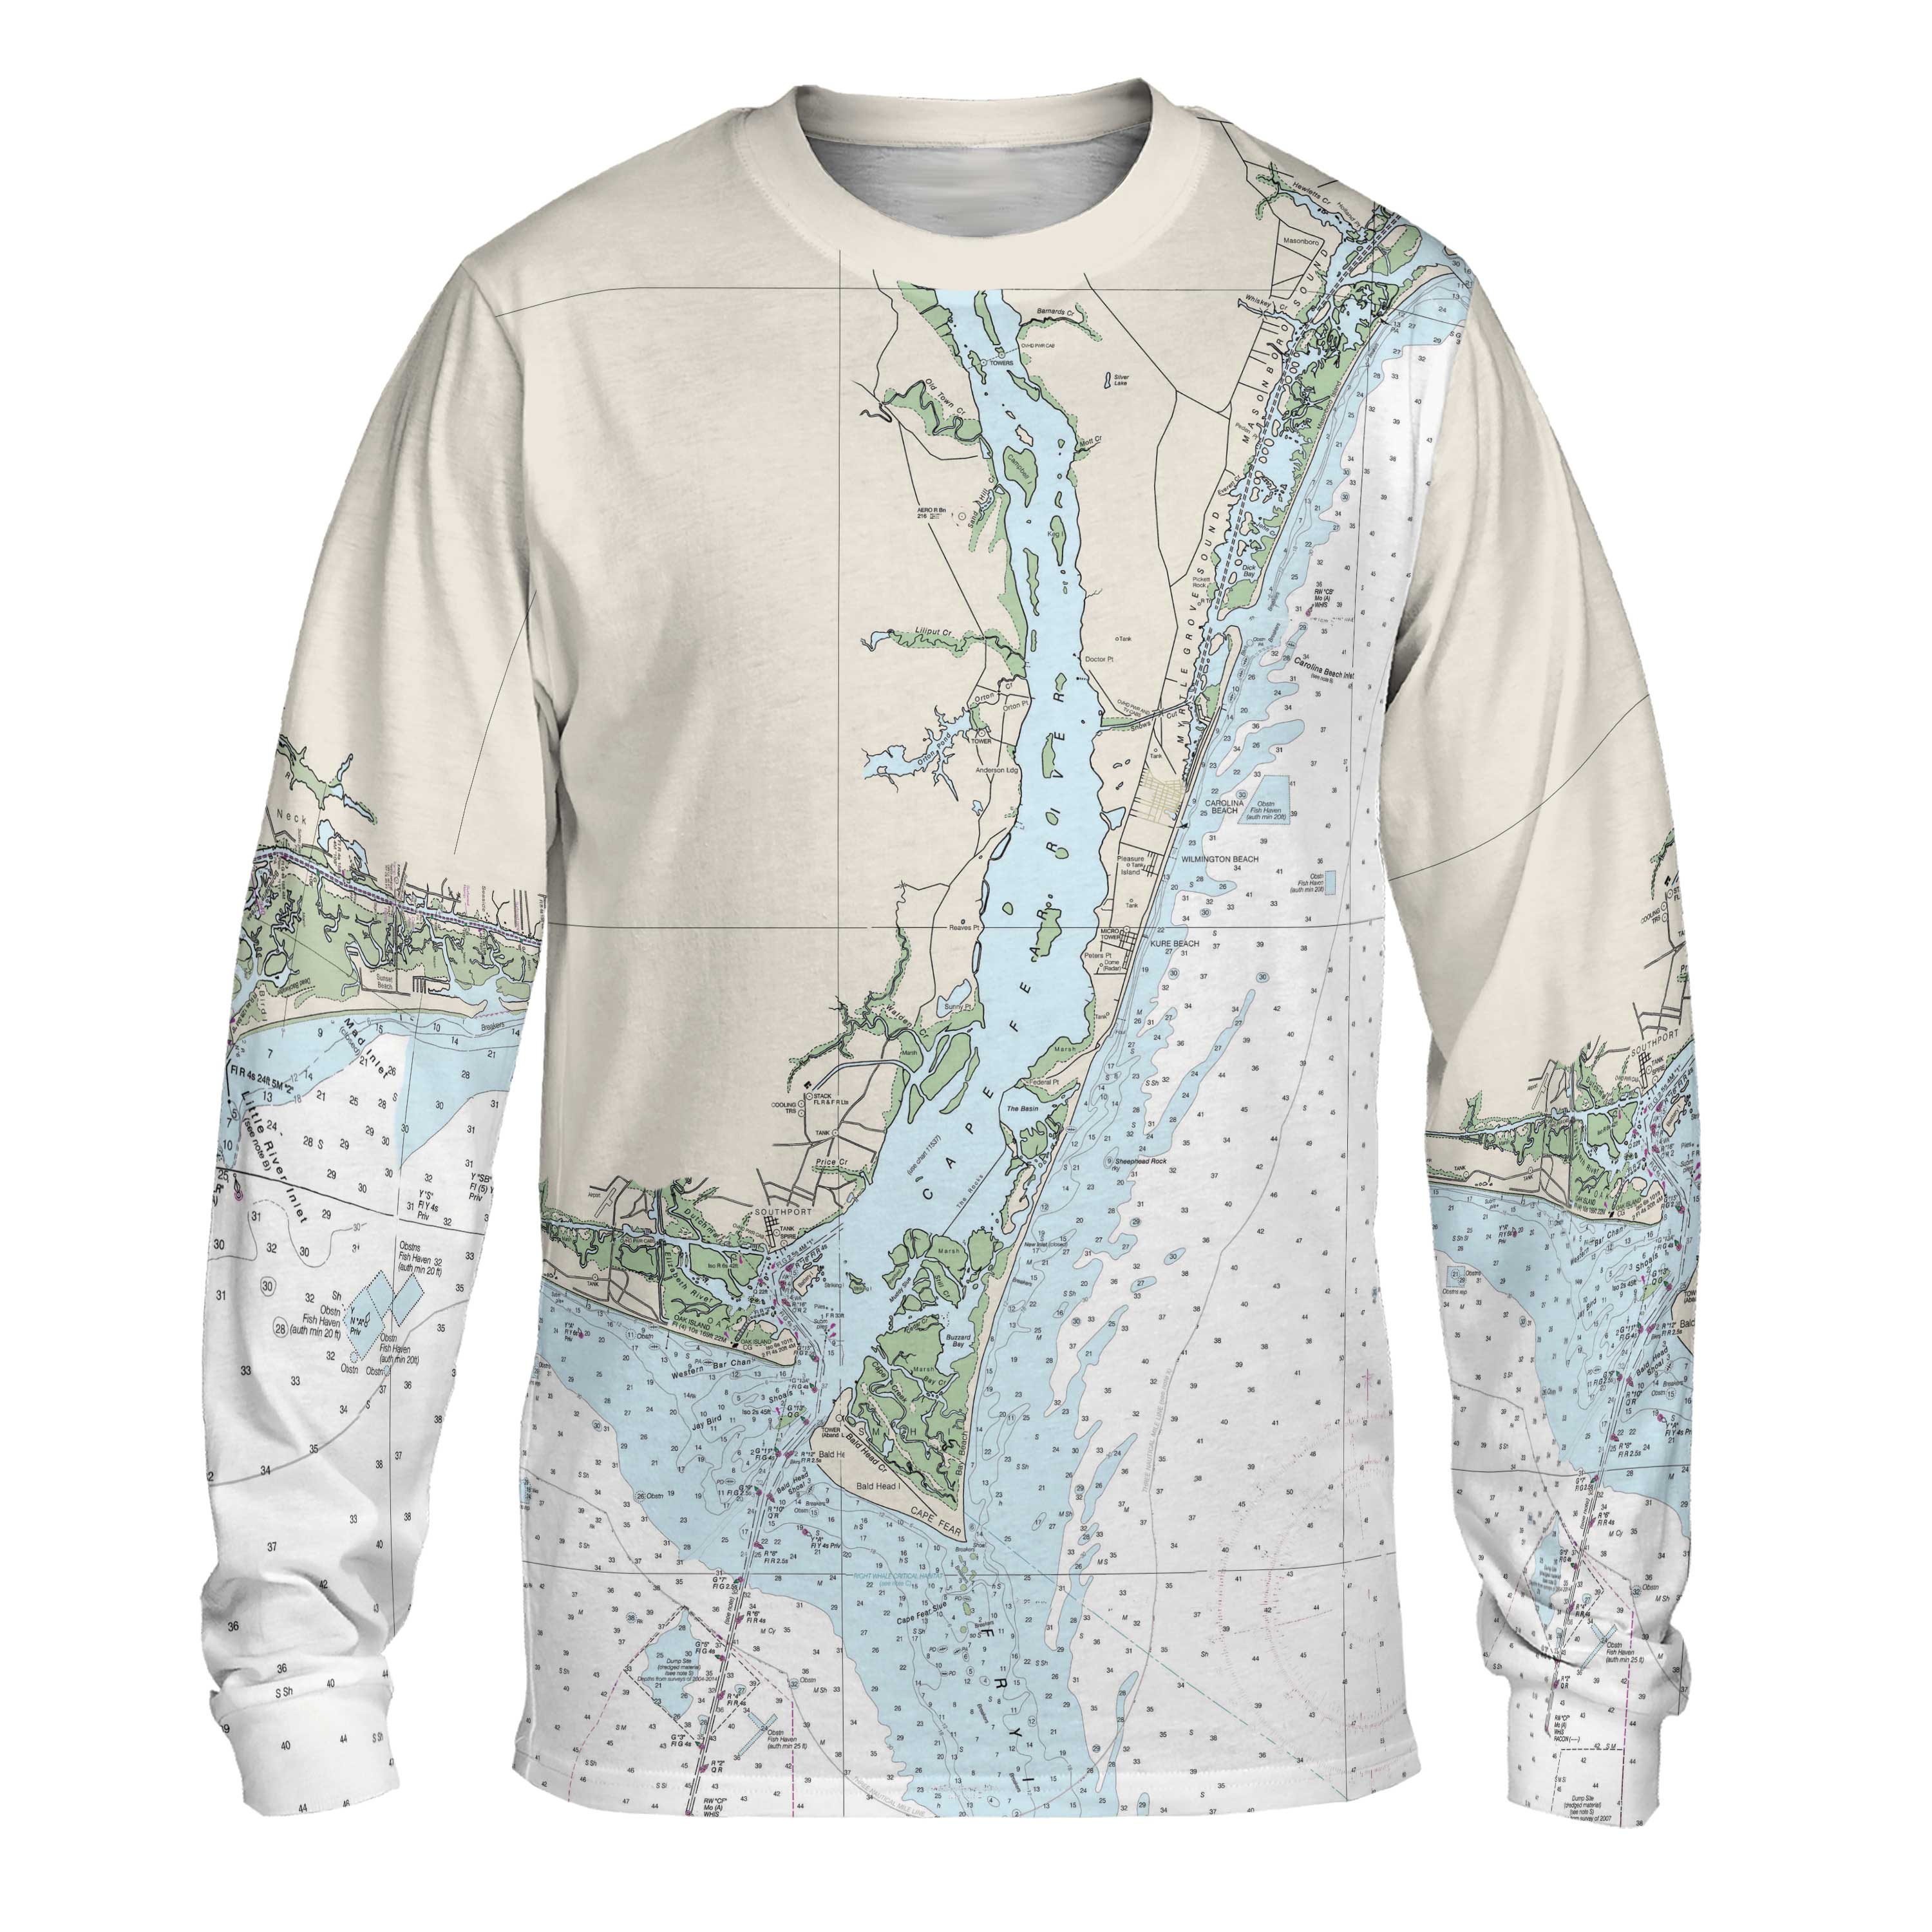 The Cape Fear to Little RIver Long Sleeve Crewneck Tee